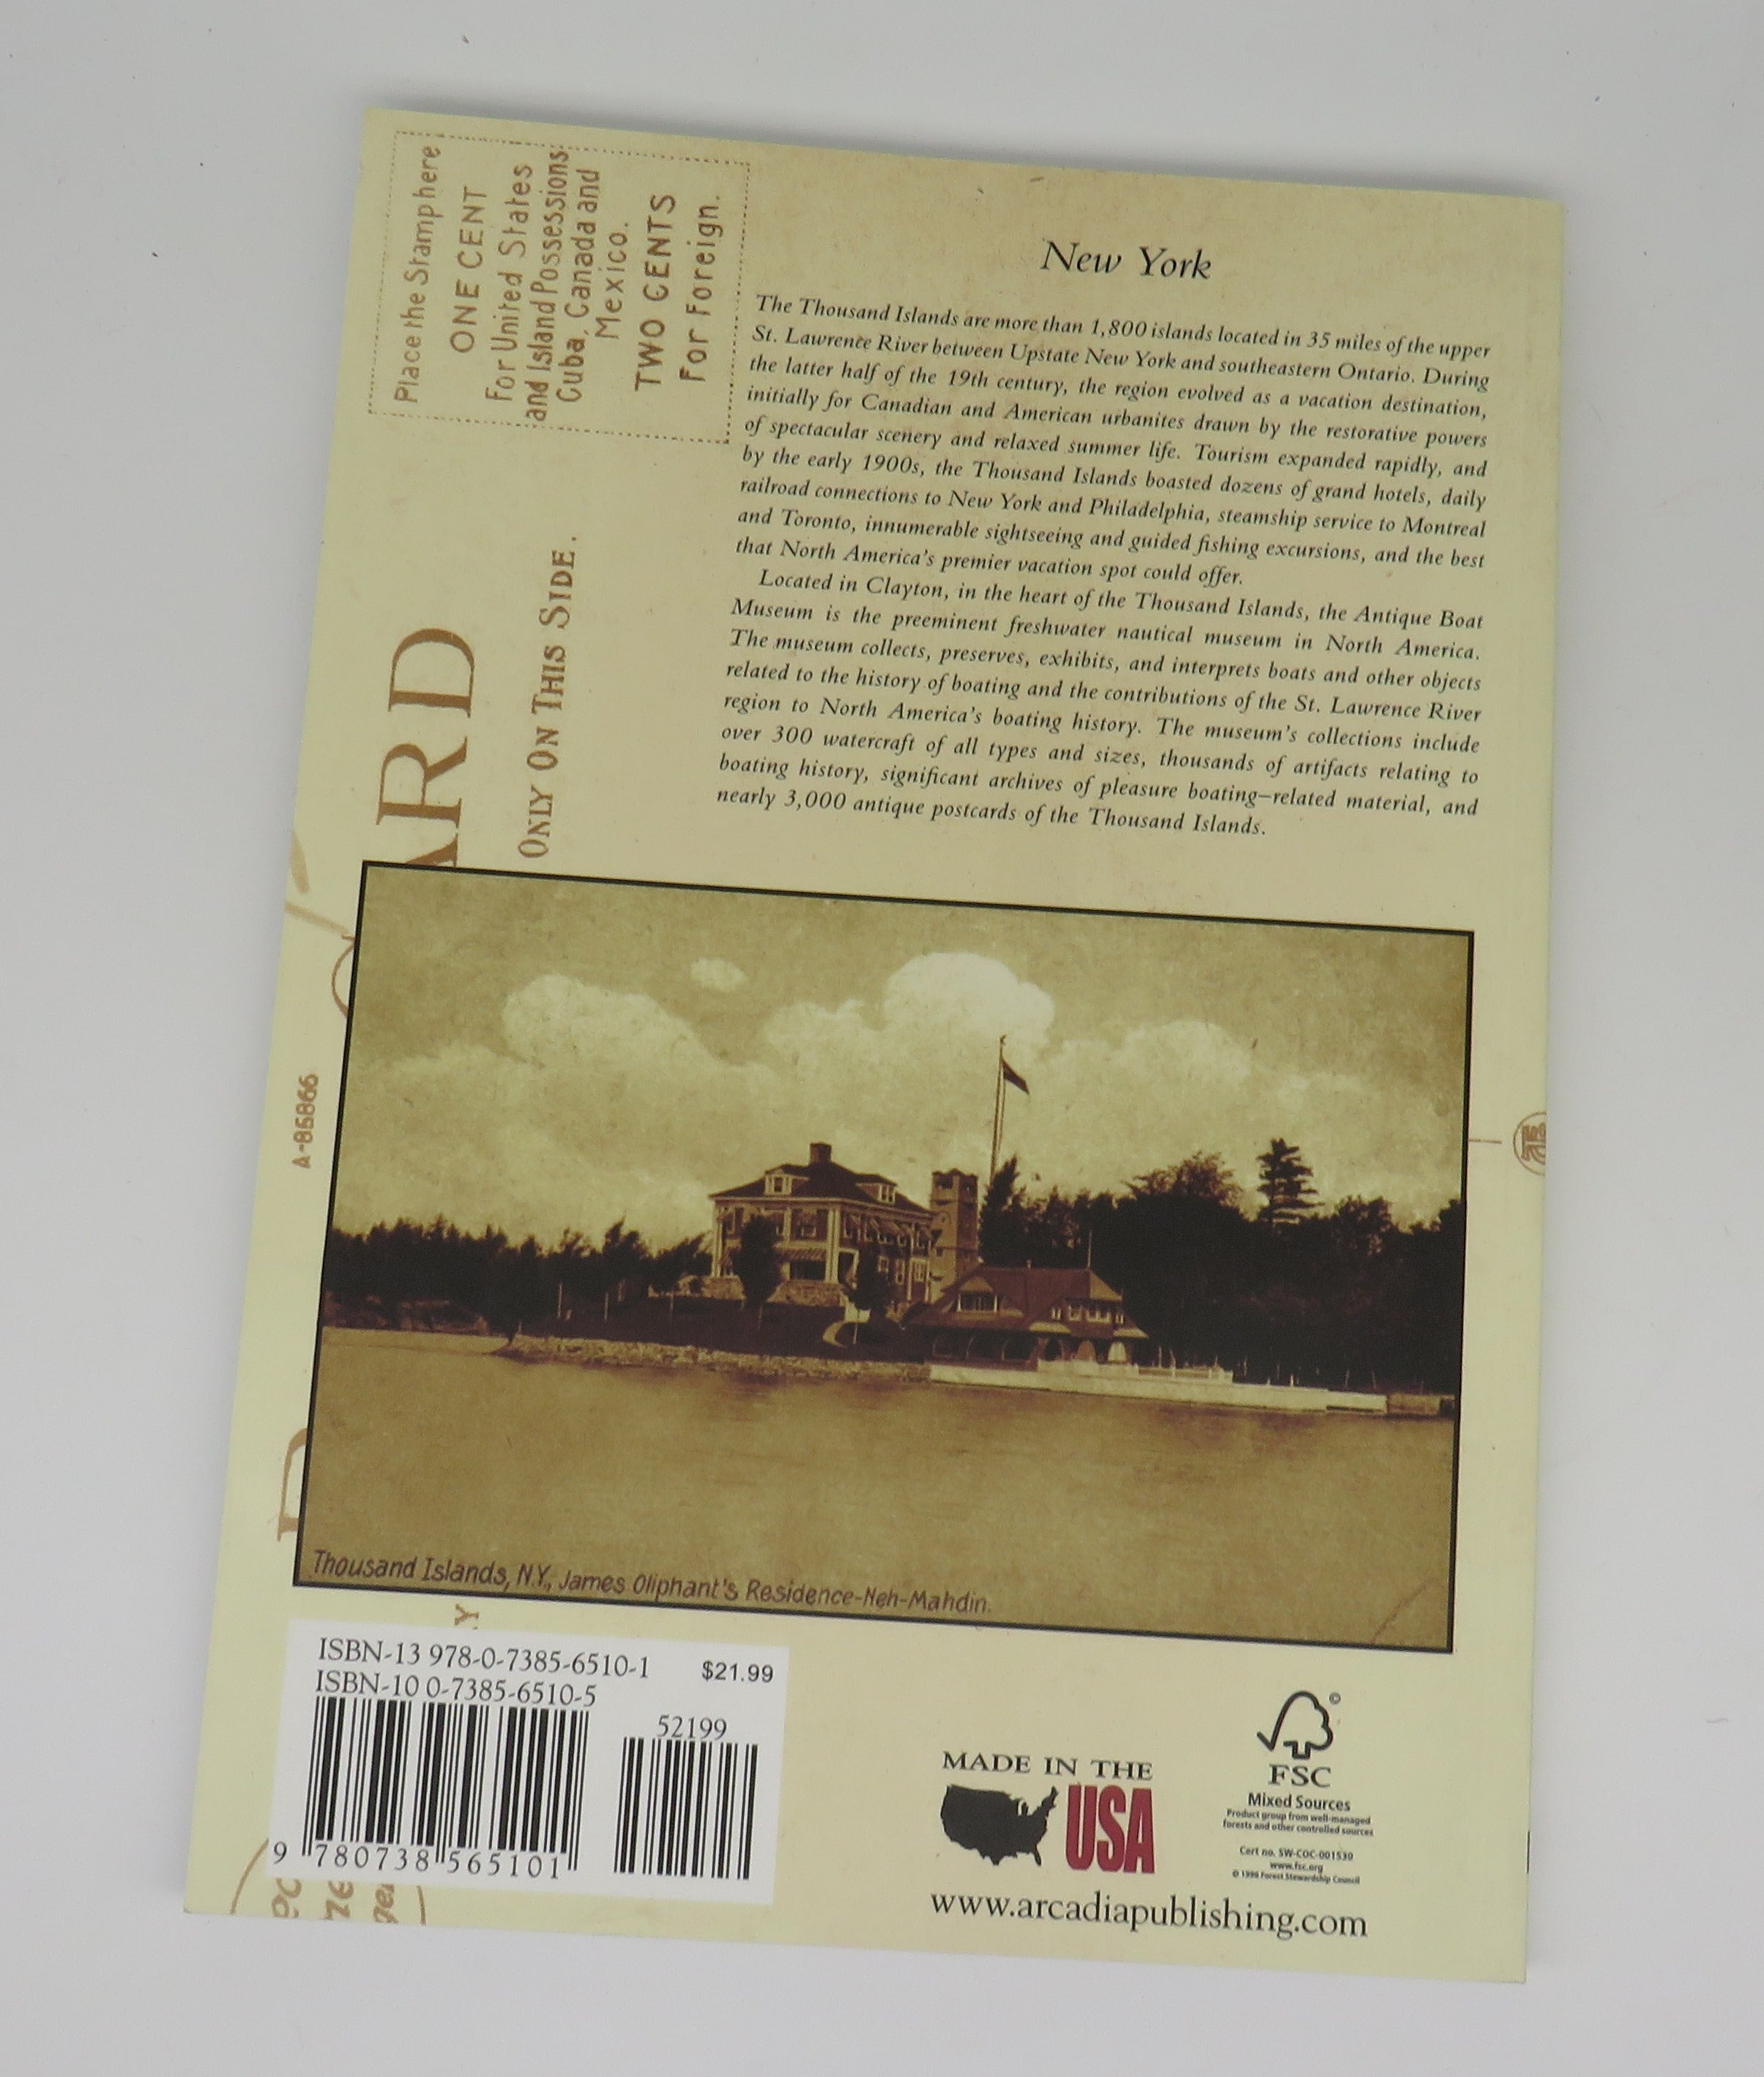 Images of America Post Card History Series The Thousand Islands by the Antique Boat Museum